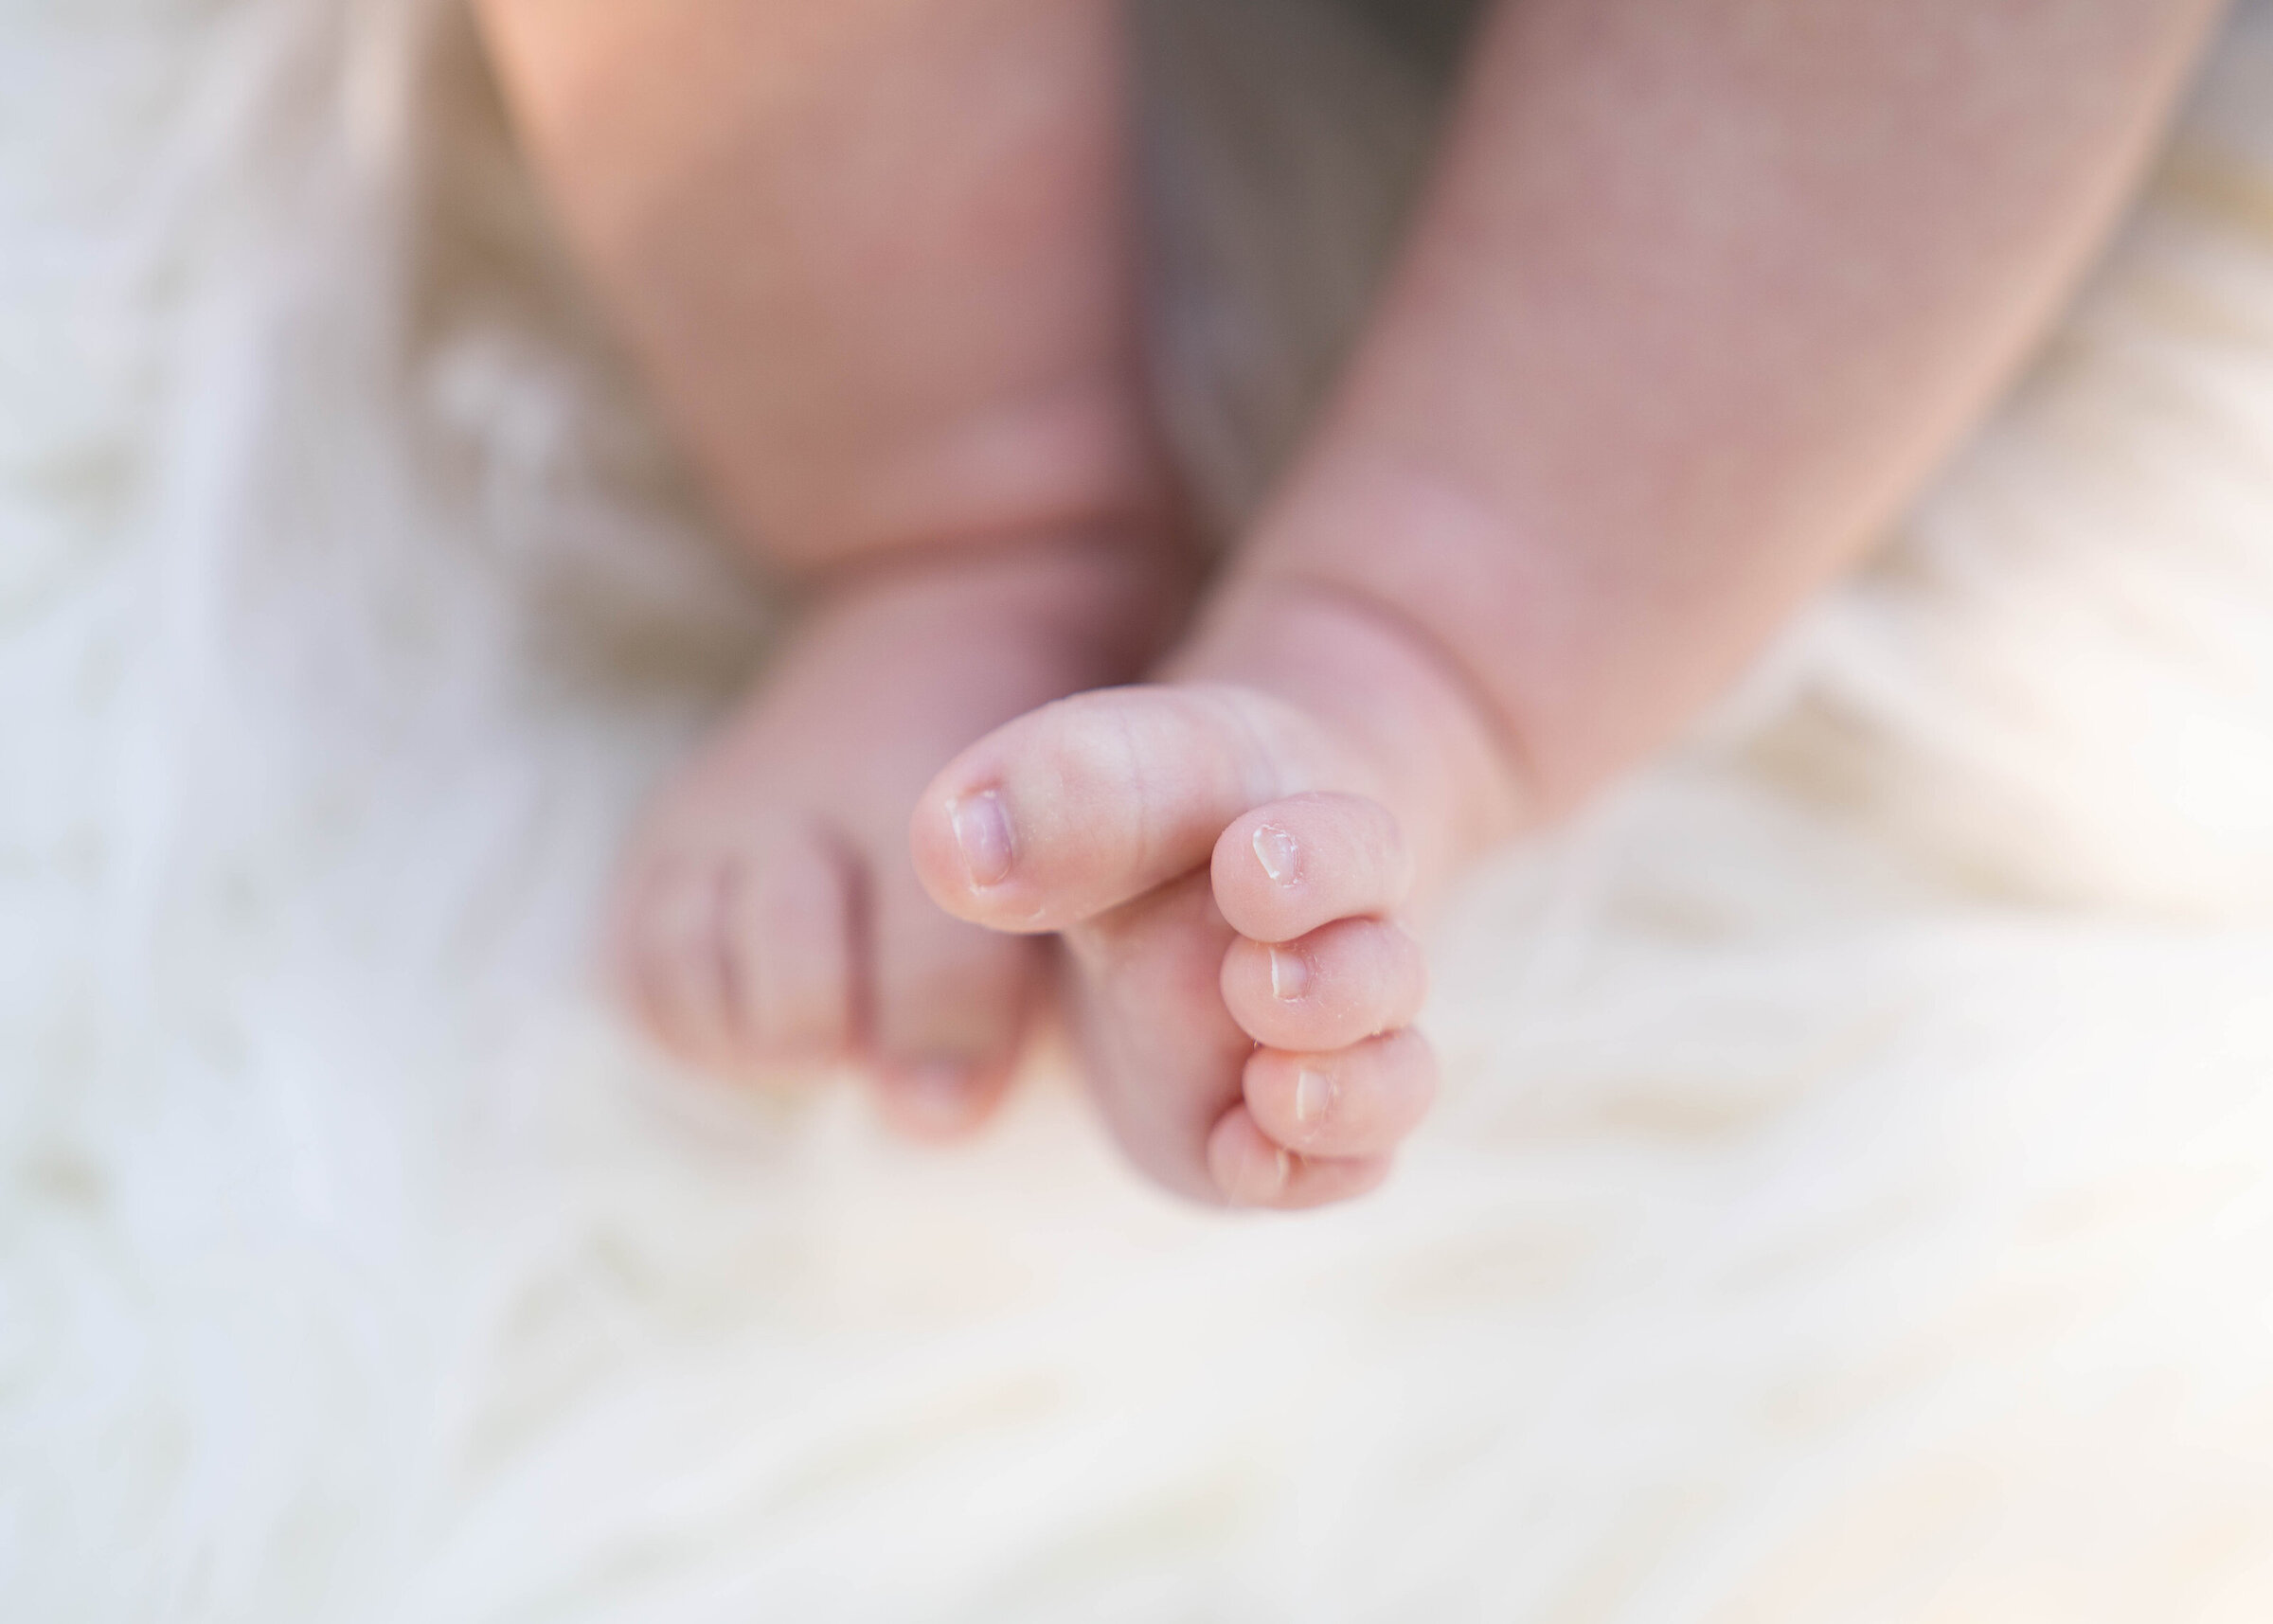 A photo of a baby's tiny toes